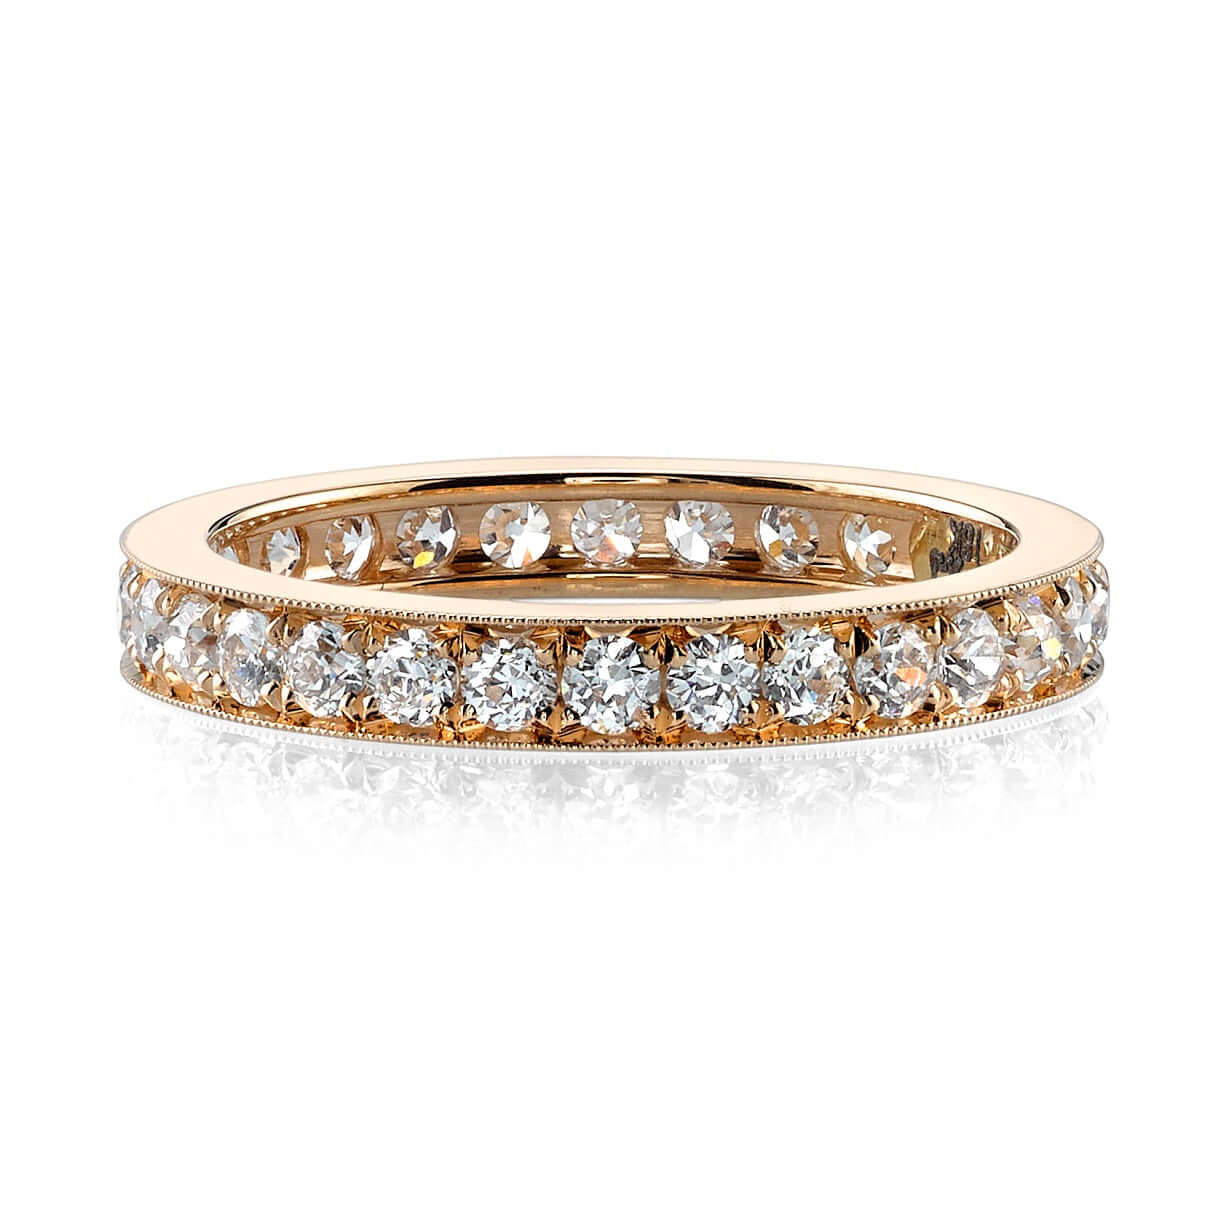 SINGLE STONE CARMELA SMALL BAND | Approximately 1.00ctw G-H/VS old European cut diamonds channel set in a handcrafted eternity band. Approximate band width 2.8mm. Please inquire for additional customization.